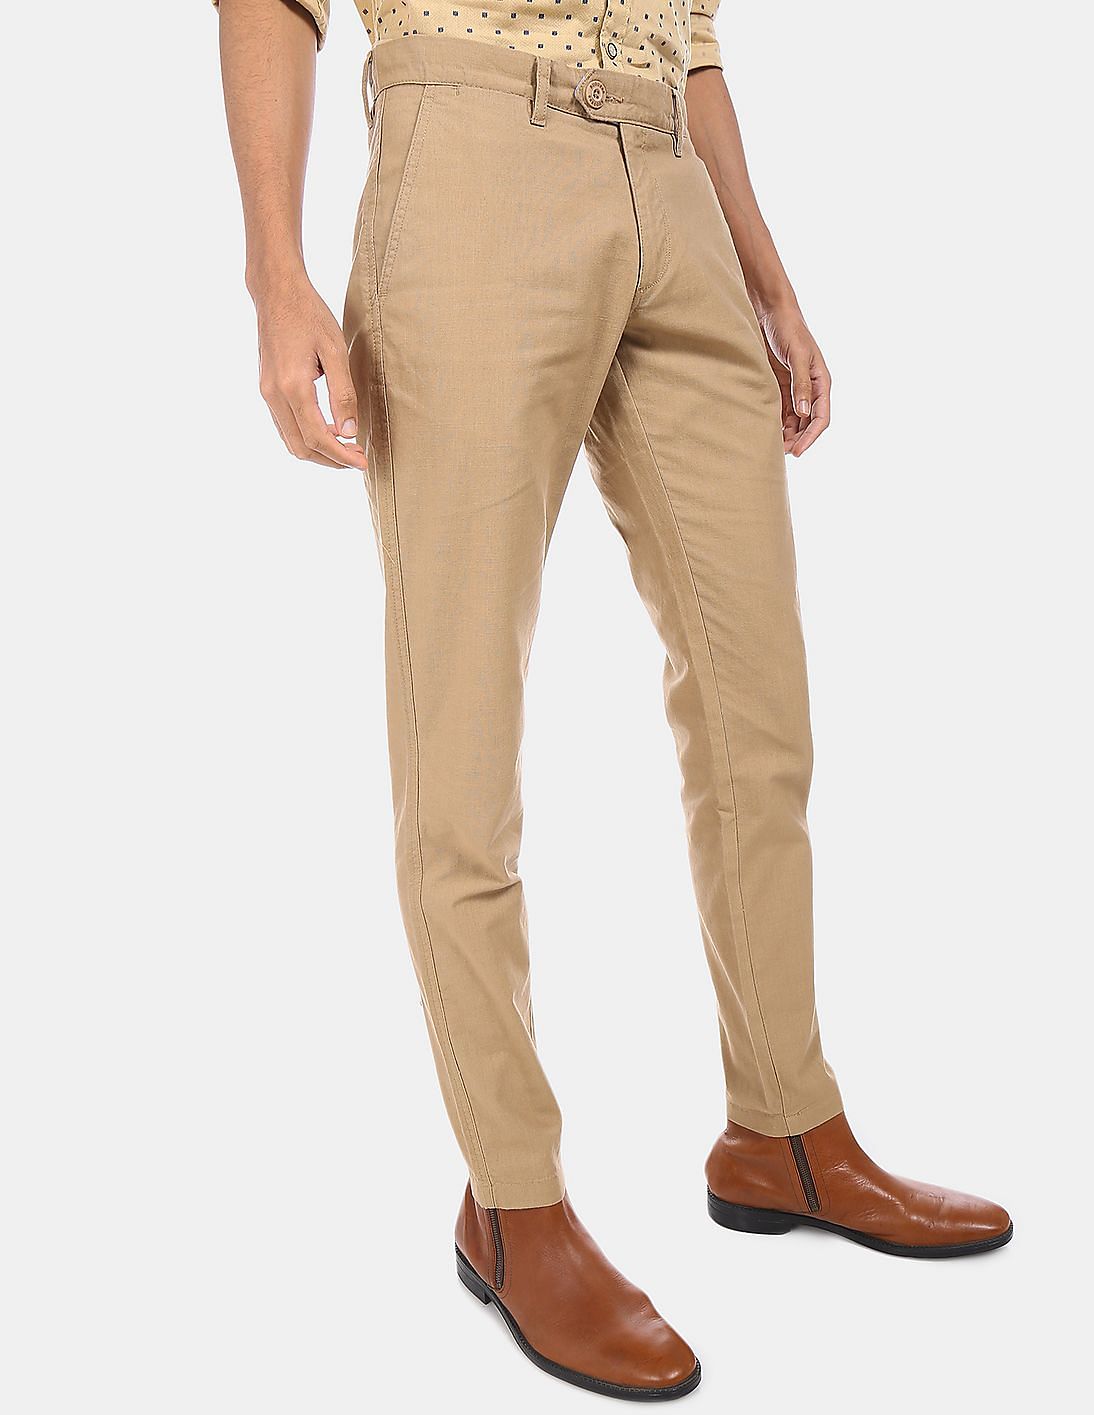 Latest Ruggers Chinos arrivals  4 products  FASHIOLAin